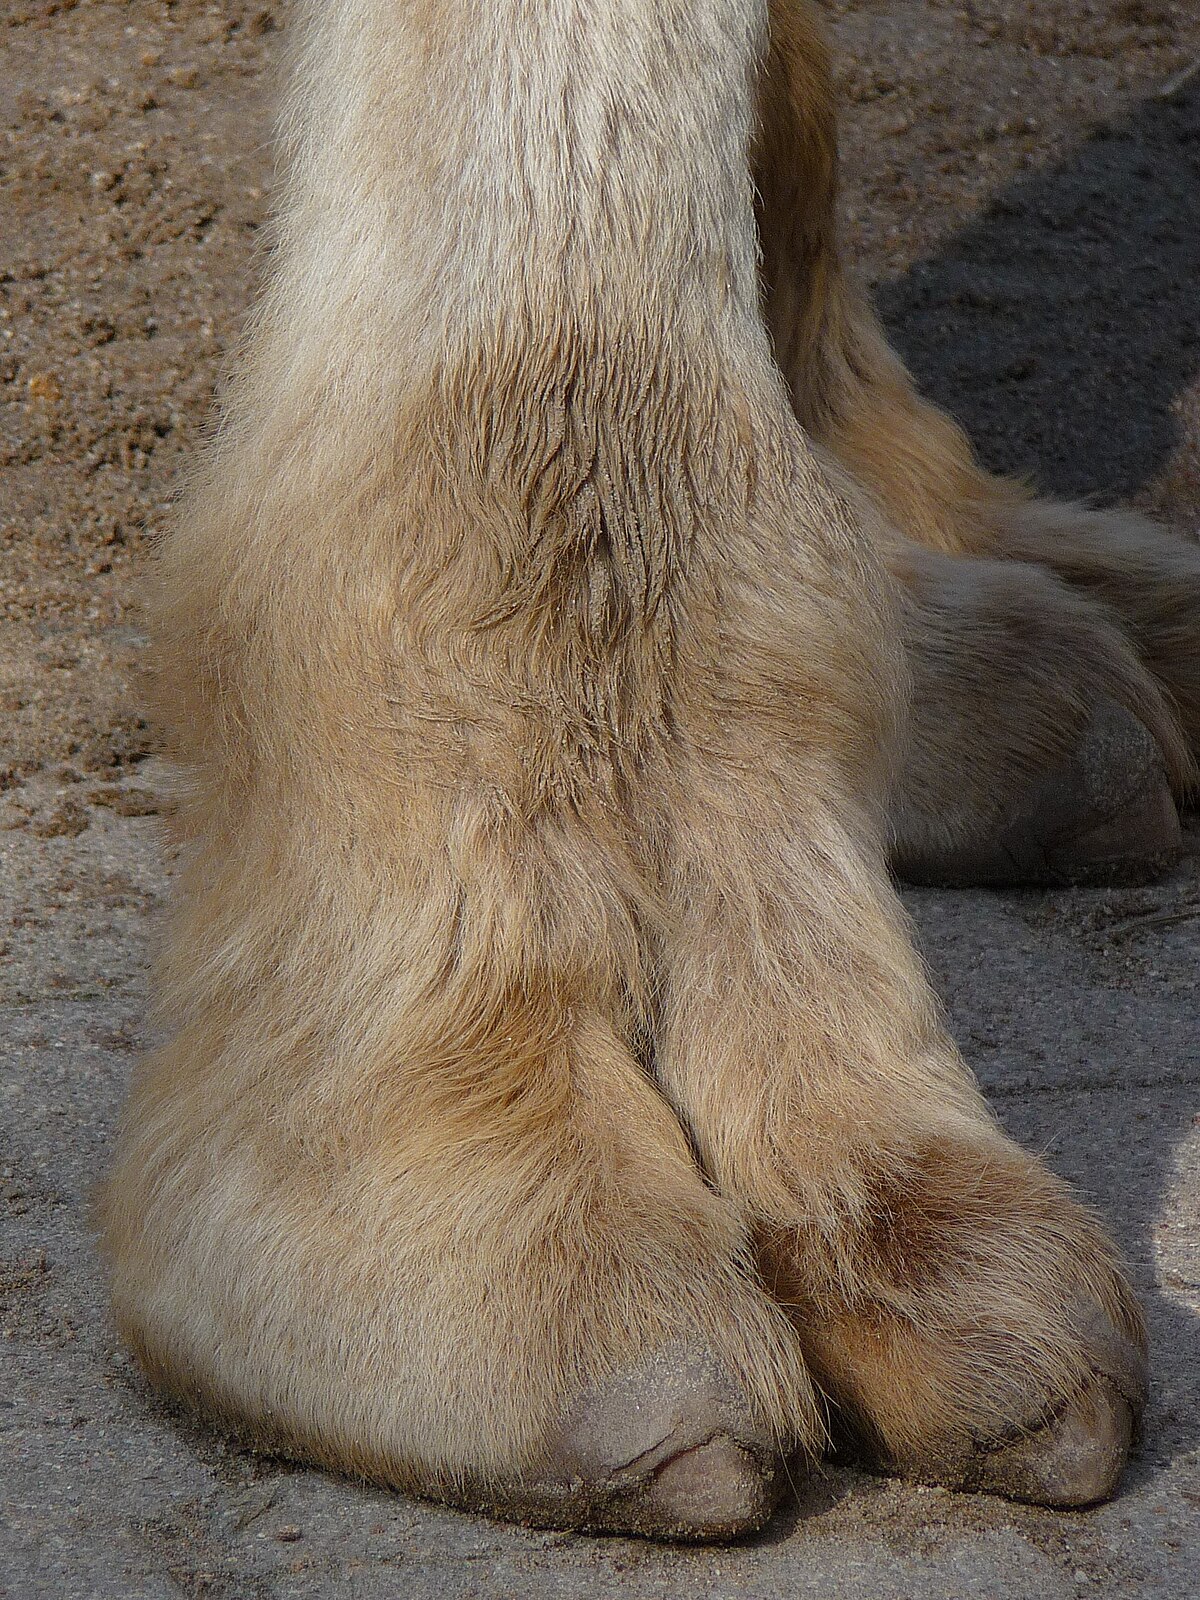 Camel toes is it on purpose? - GirlsAskGuys